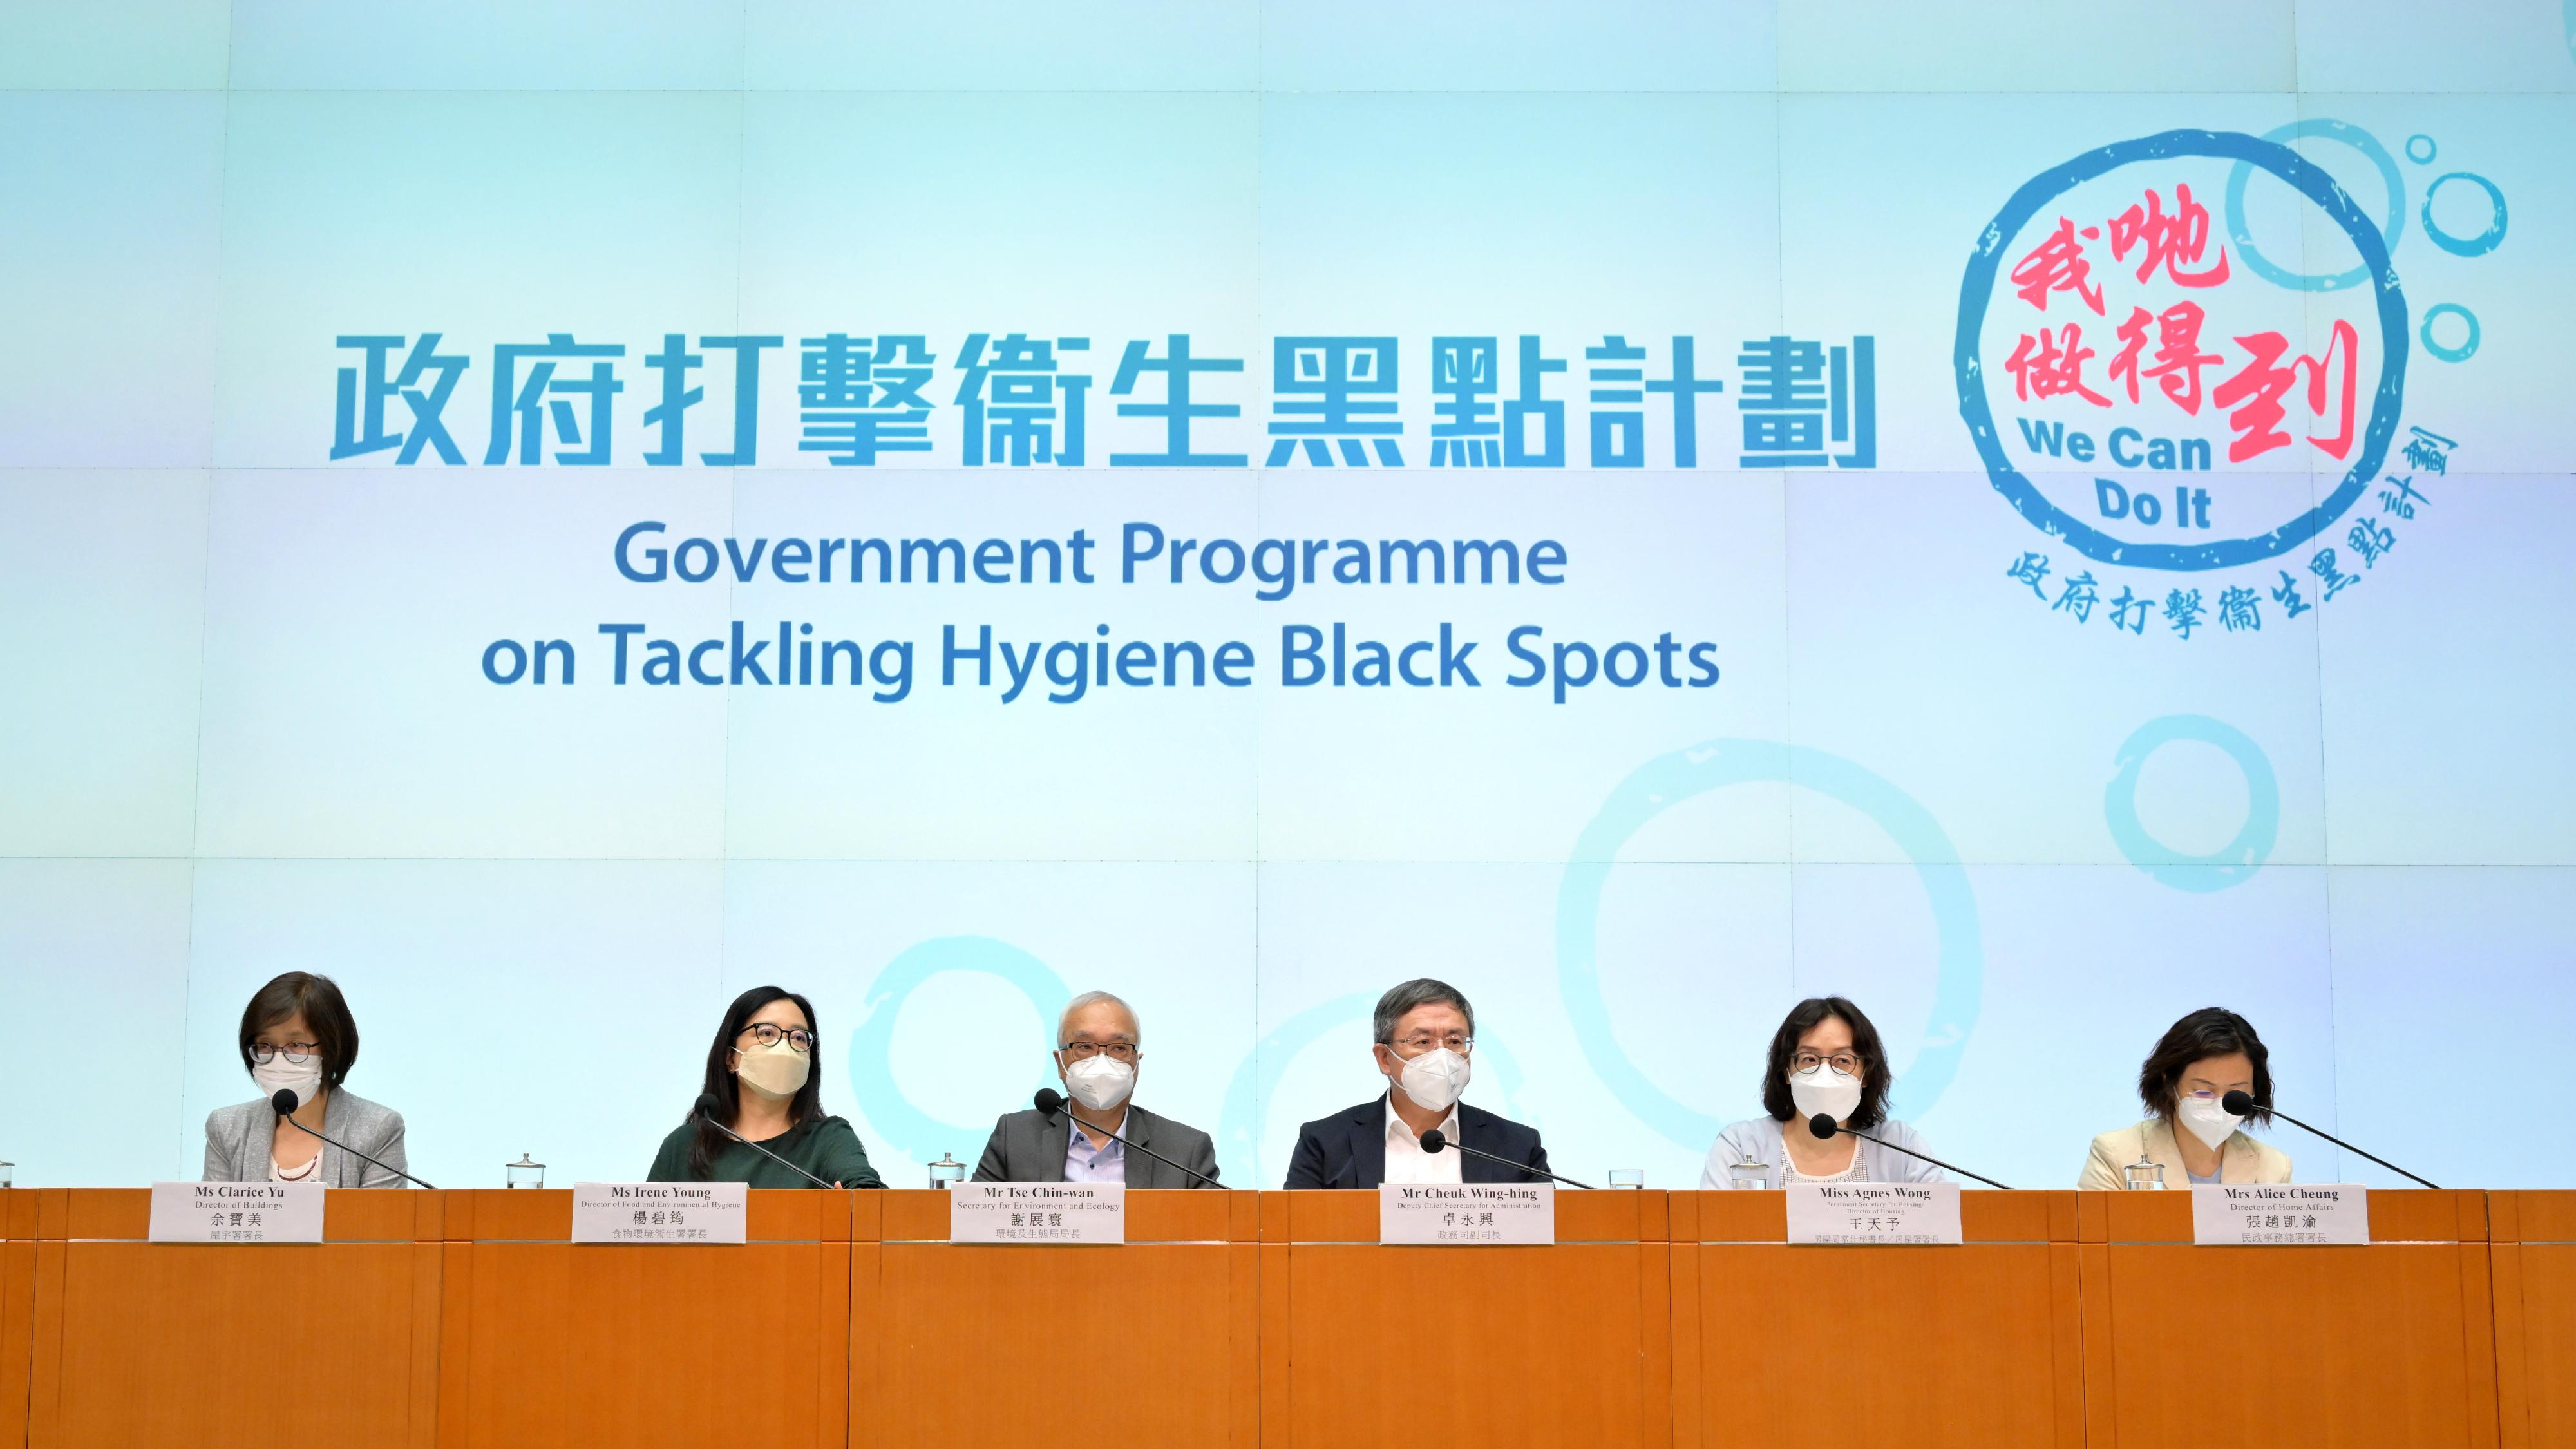 The Deputy Chief Secretary for Administration, Mr Cheuk Wing-hing (third left), holds a press conference on the Government Programme on Tackling Hygiene Black Spots with the Secretary for Environment and Ecology, Mr Tse Chin-wan (third left); the Permanent Secretary for Housing/Director of Housing, Miss Agnes Wong (second right); the Director of Food and Environmental Hygiene, Ms Irene Young (second left); the Director of Home Affairs, Mrs Alice Cheung (first right); and the Director of Buildings, Ms Clarice Yu (first left), at the Central Government Offices, Tamar, today (August 12).